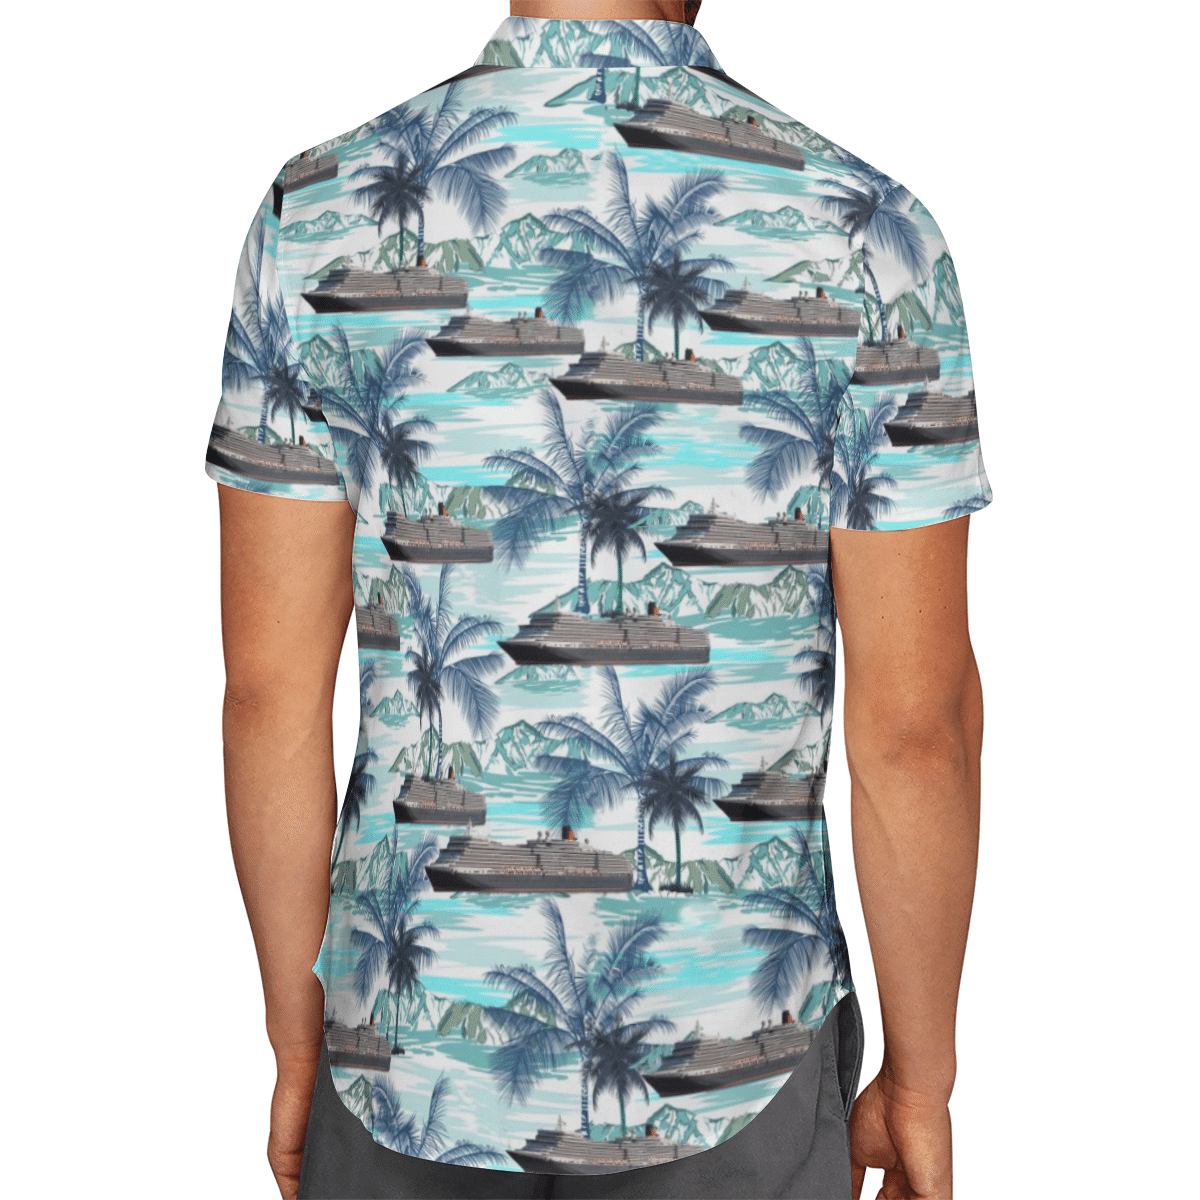 Going to the beach with a quality shirt 57